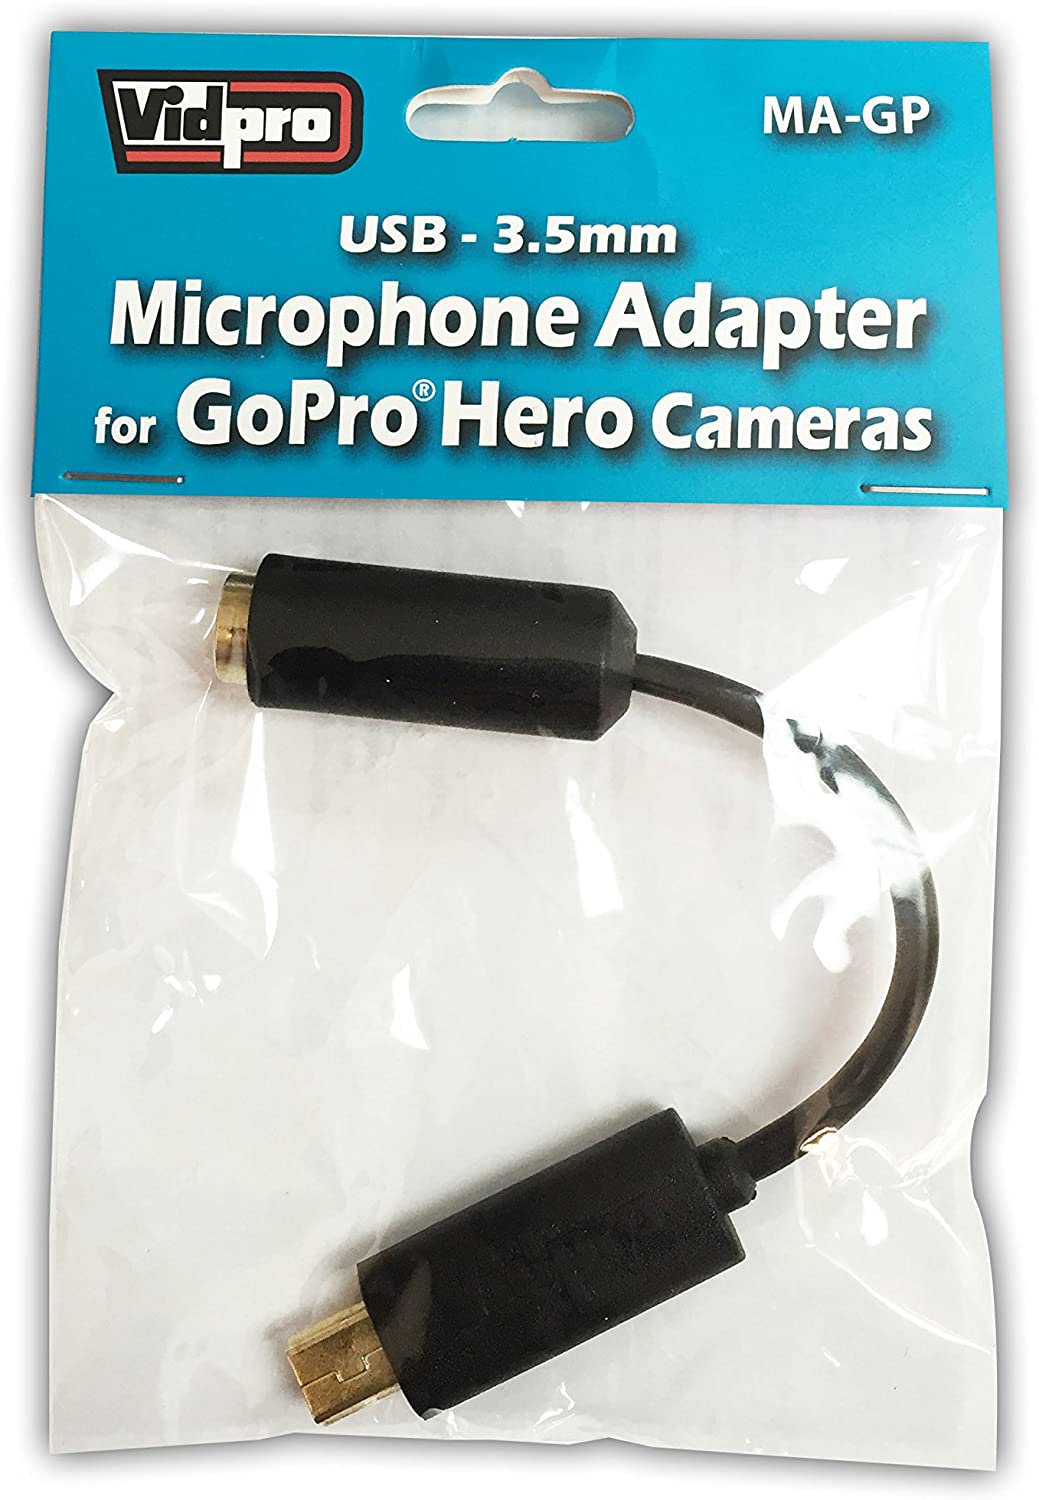 Vidpro MAGP Usb To 3.5mm Microphone Adapter